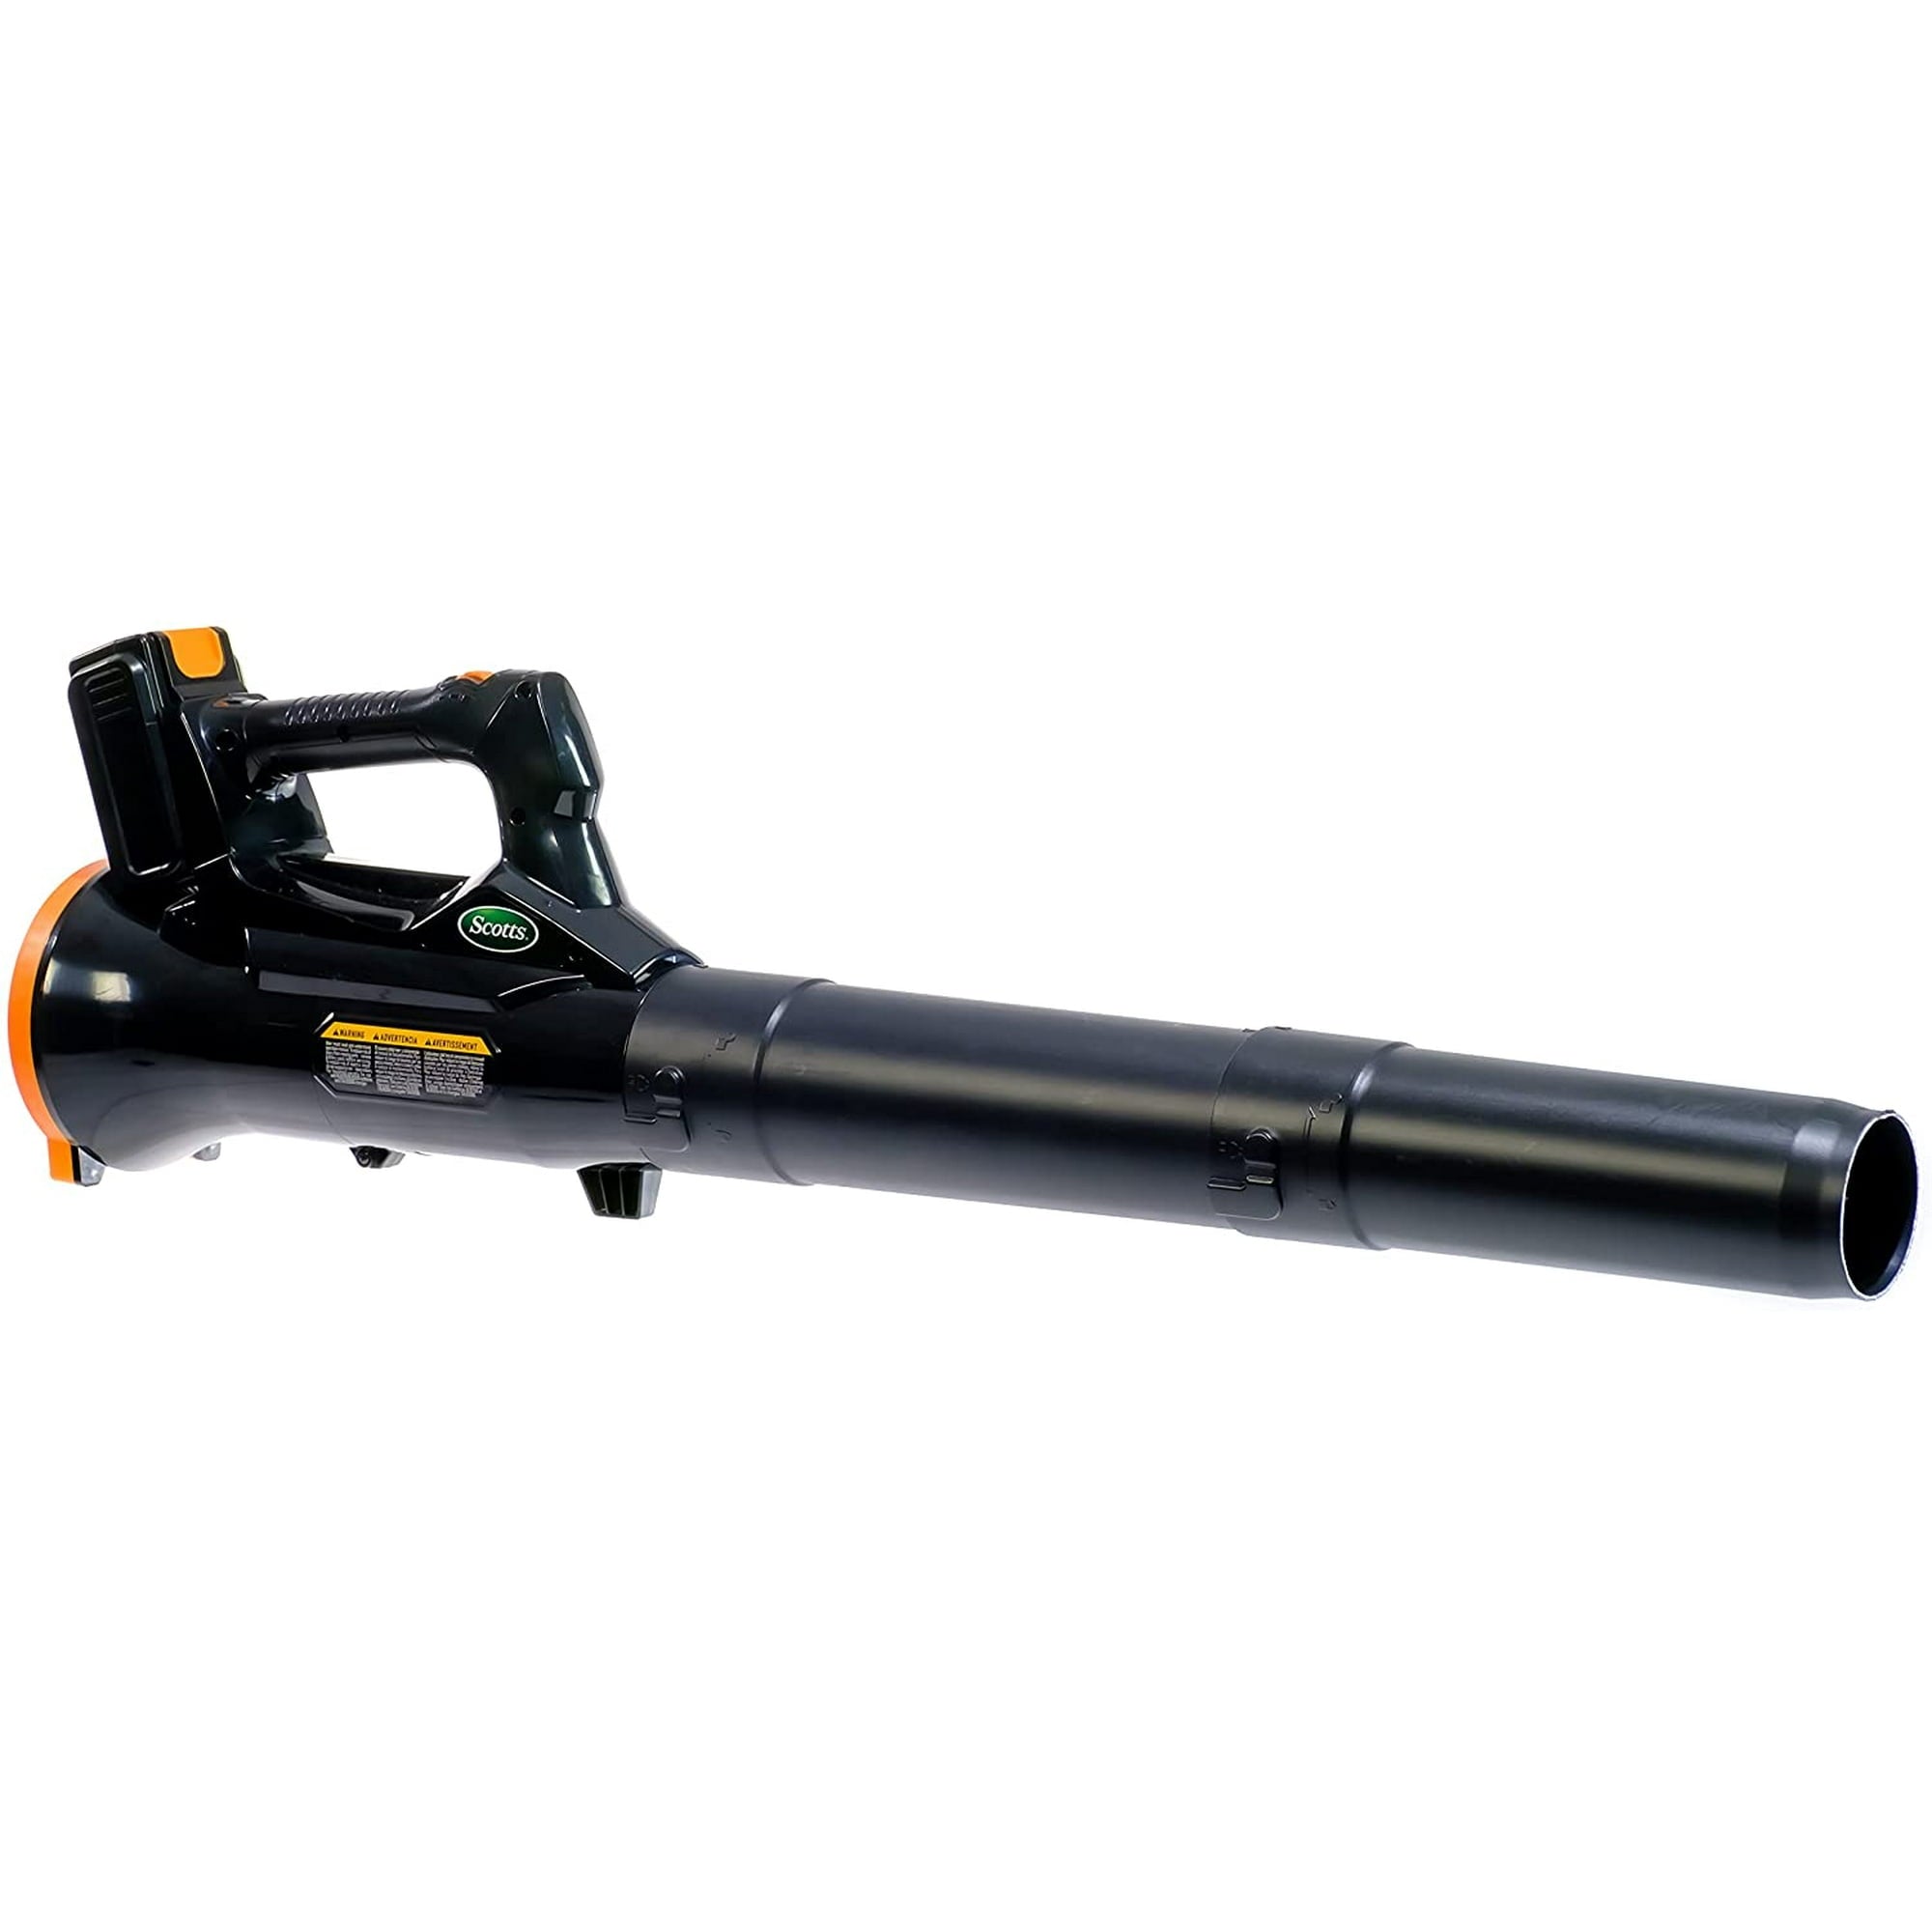 Scotts LB24020S 20-Volt Cordless Electric Turbo Leaf Blower, Includes 4.0Ah Battery & Fast Charger